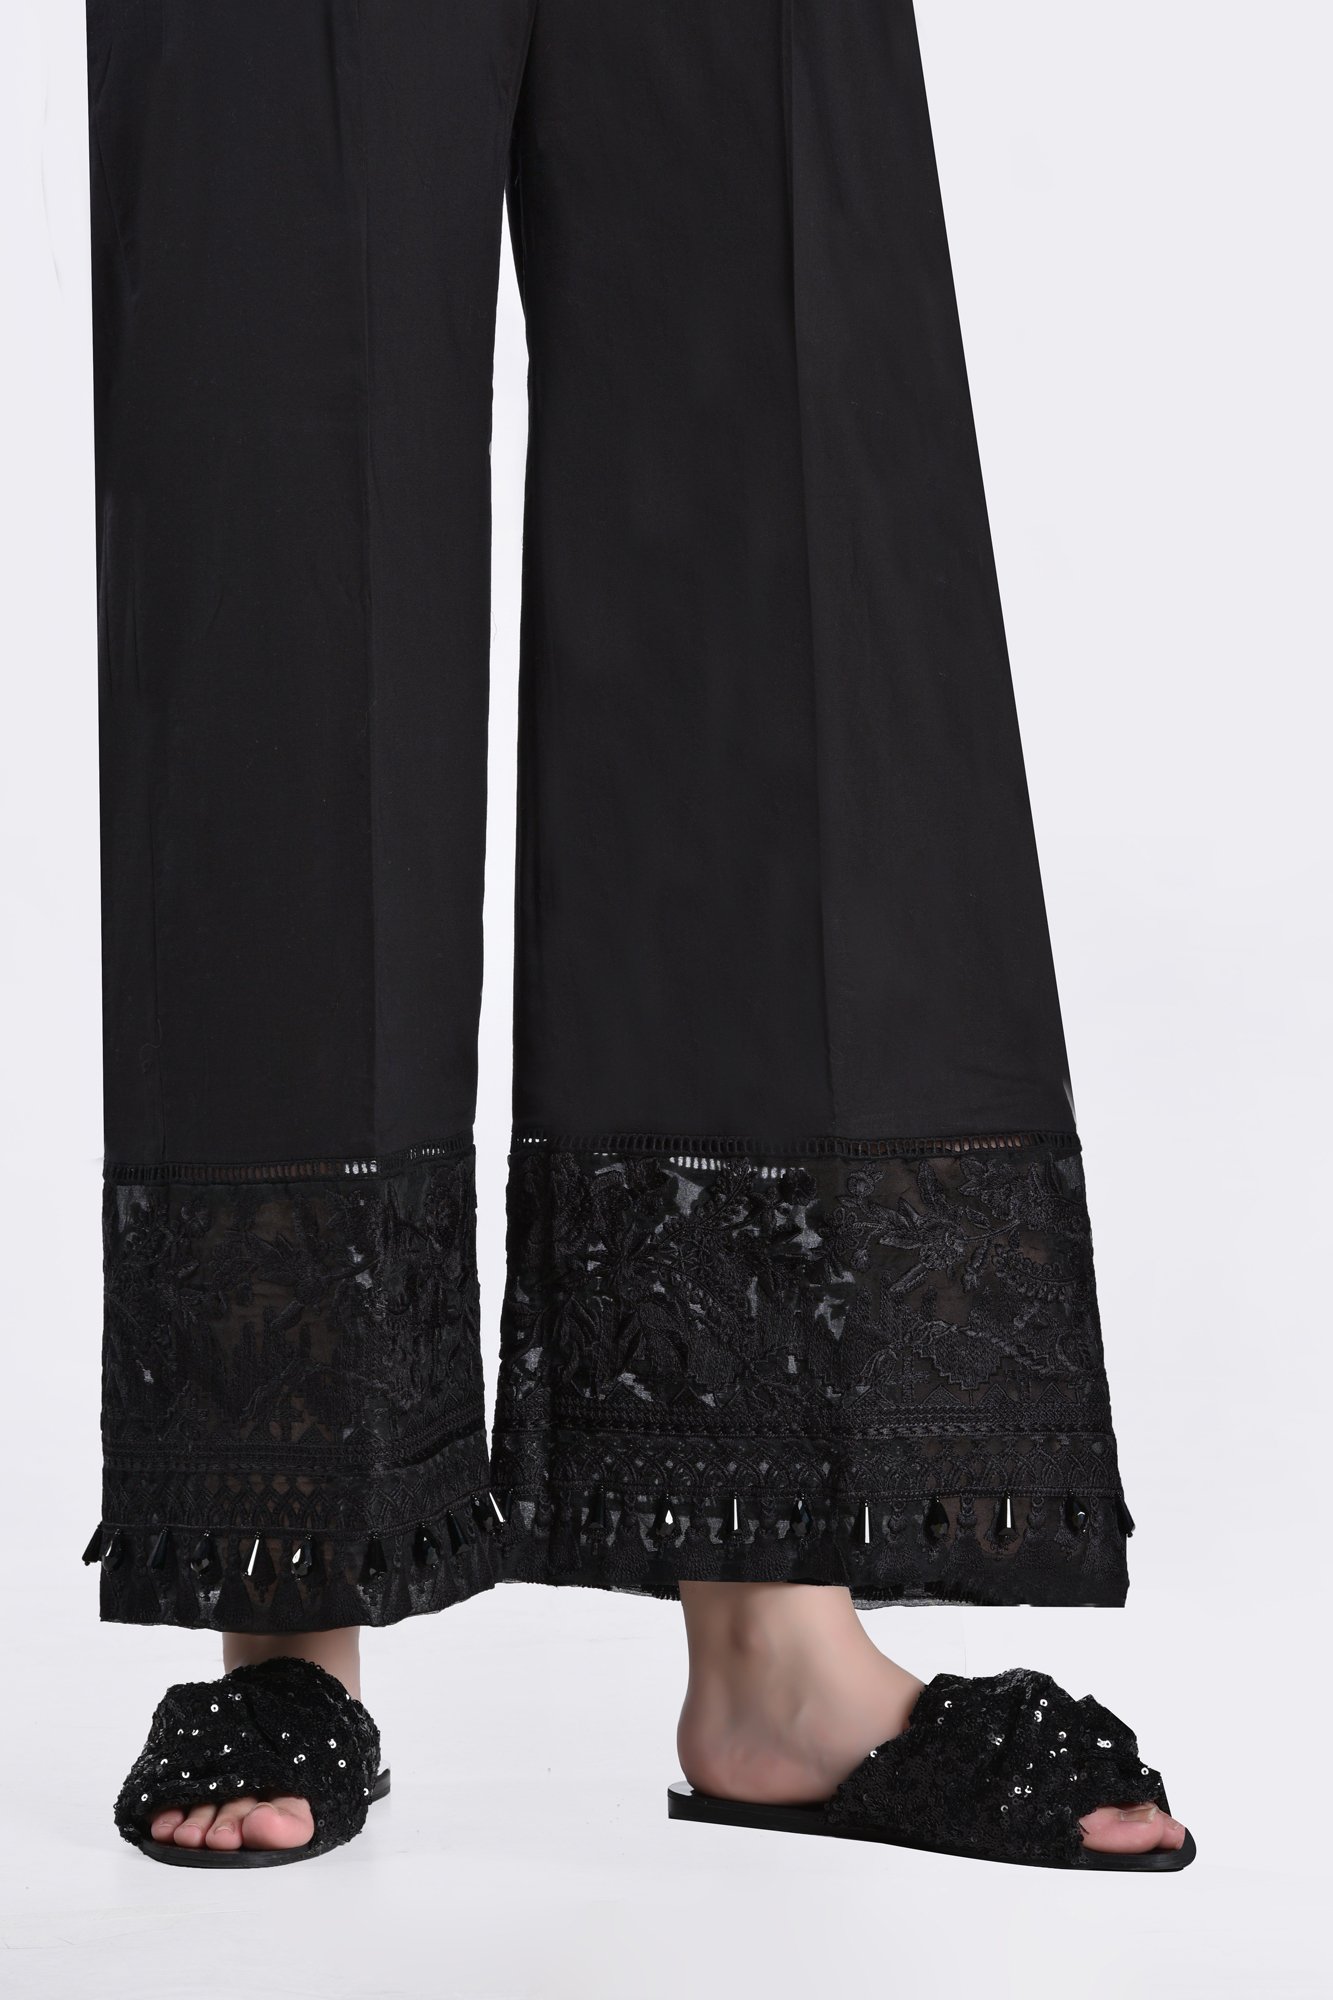 /2019/02/ethnic-by-outfitters-spring-summer-19-trouser-wbb191918-image1.jpeg